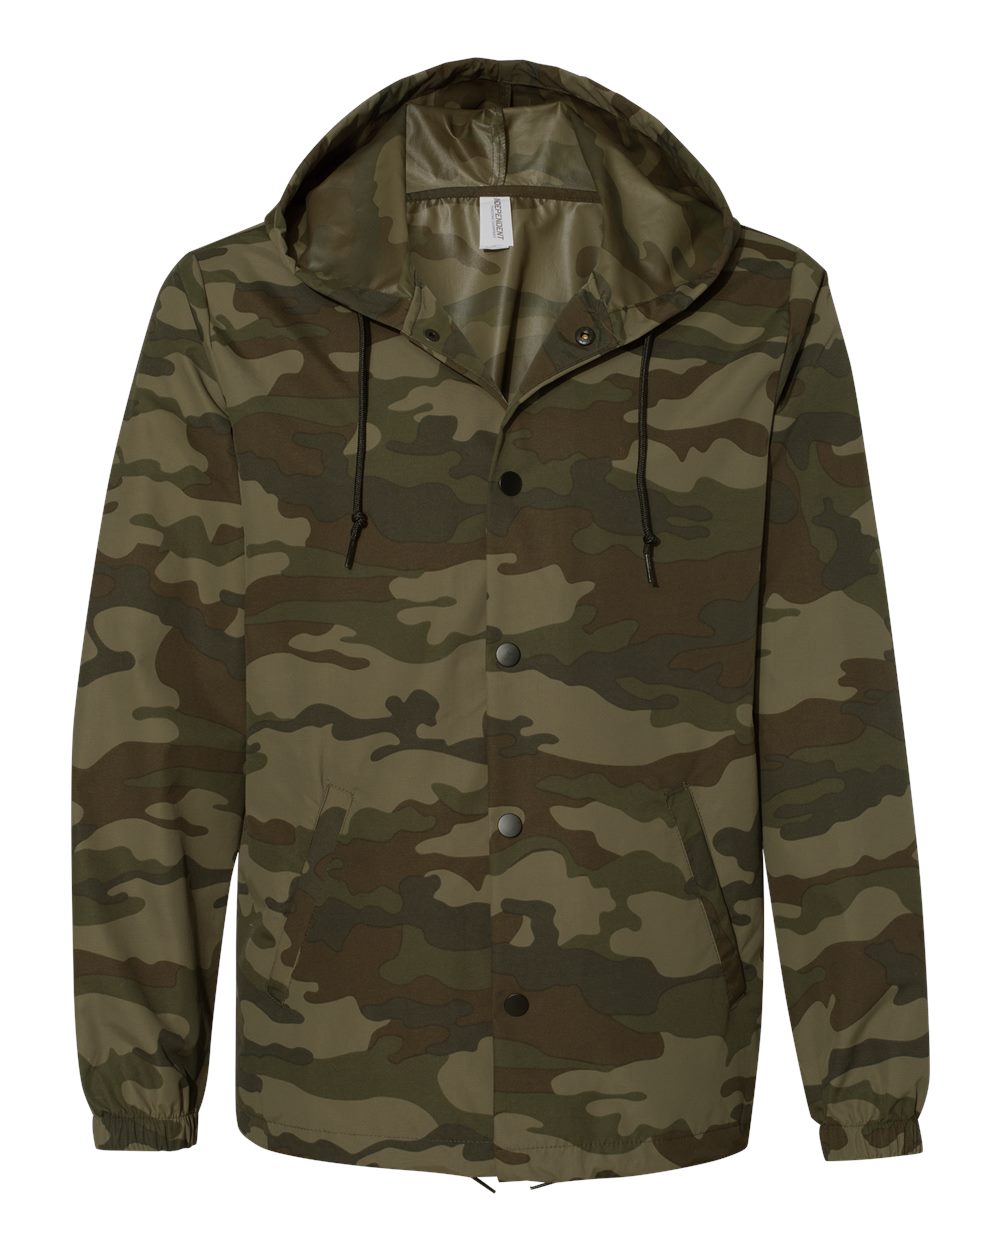 independent trading co hooded windbreaker coachs jacket forest camo